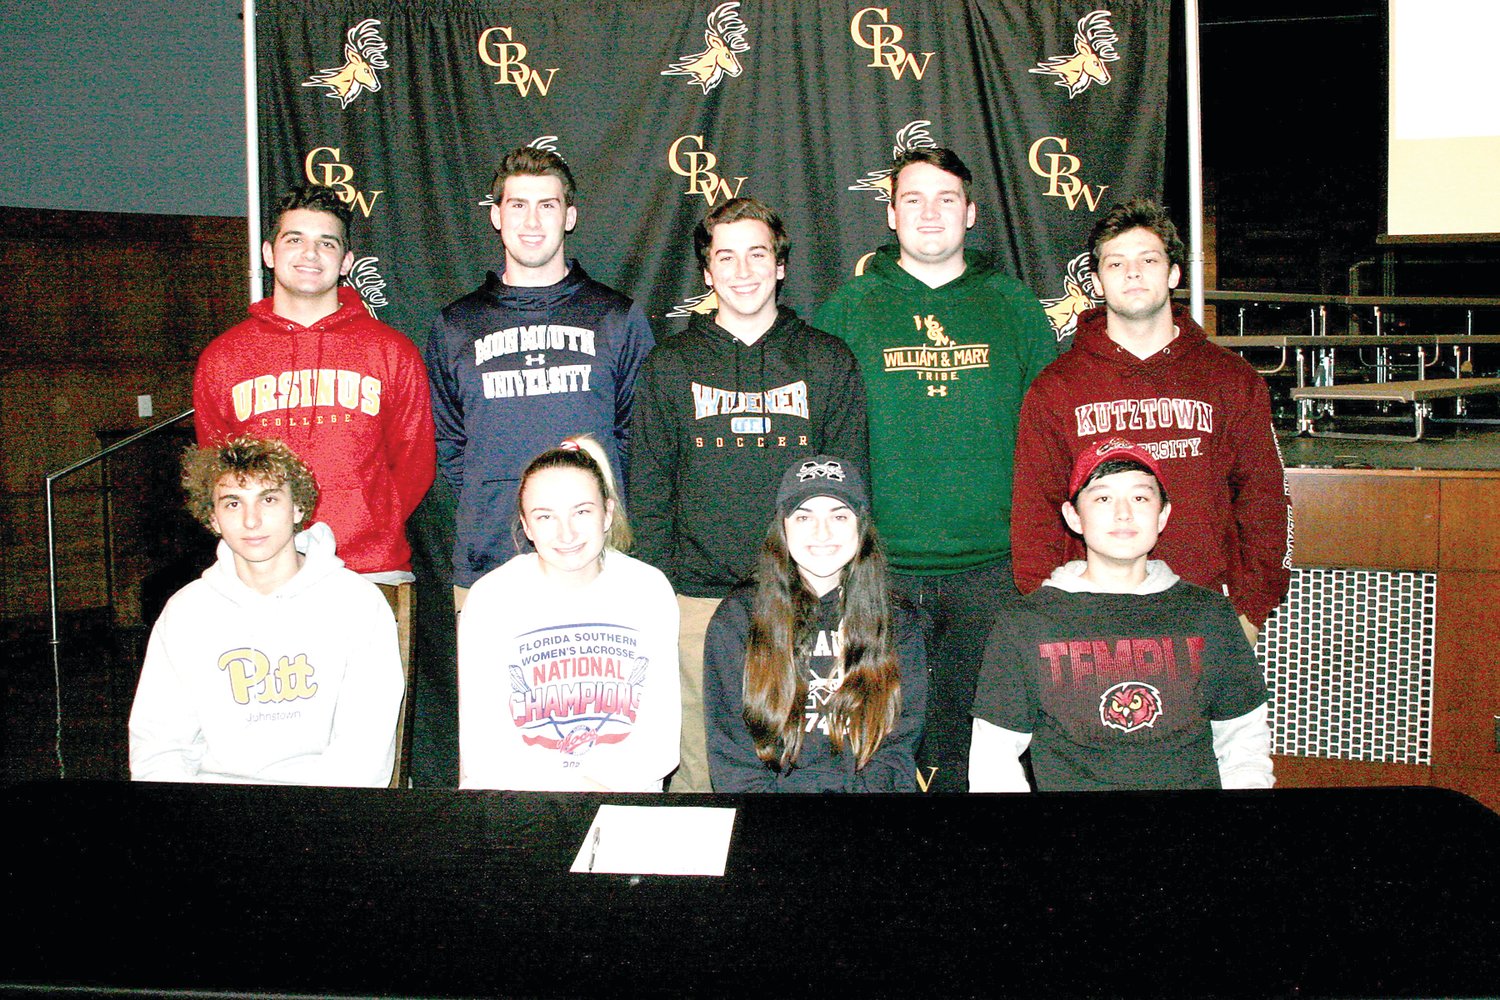 At the Central Bucks West letter signing ceremony are, from left, front row, Luke Cimakasky (Pitt Johnstown), Ryan Kelly (Florida Southern), Alexa Vail (Moravian), Jimi Leder (Temple); back row, Tristan Hulme (Ursinus), Jack Neri (Monmouth), Ryan Van Pelt (Widener), Ryan McKenna (William & Mary) and Jack Fallon (Kutztown). Photograph by Mary Jane Souder.